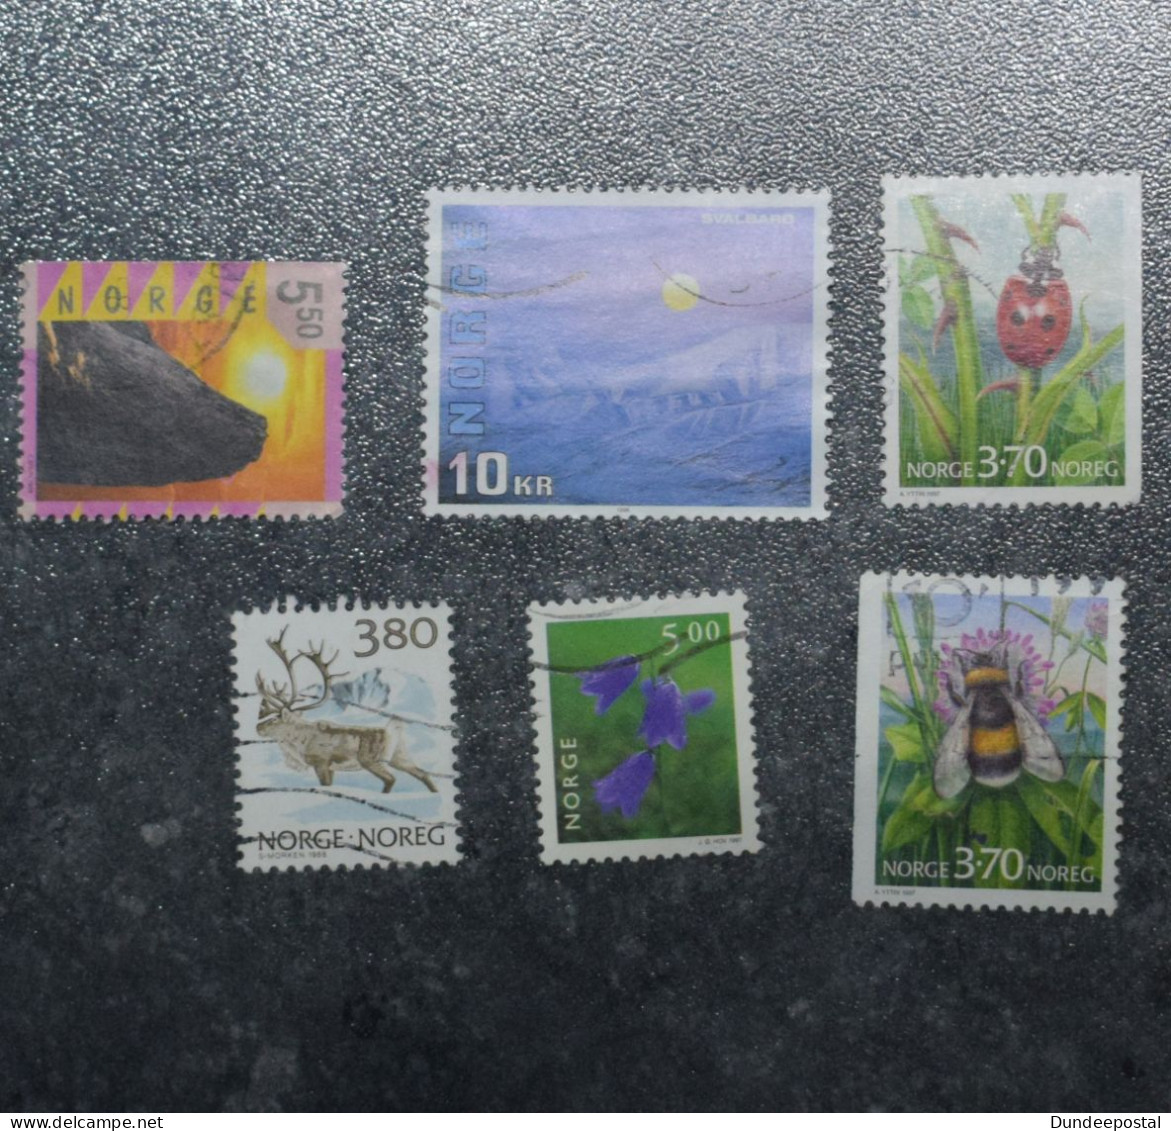 NORWAY NORGE  STAMPS     Coms  Mixed  1990s   ~~L@@K~~ - Used Stamps